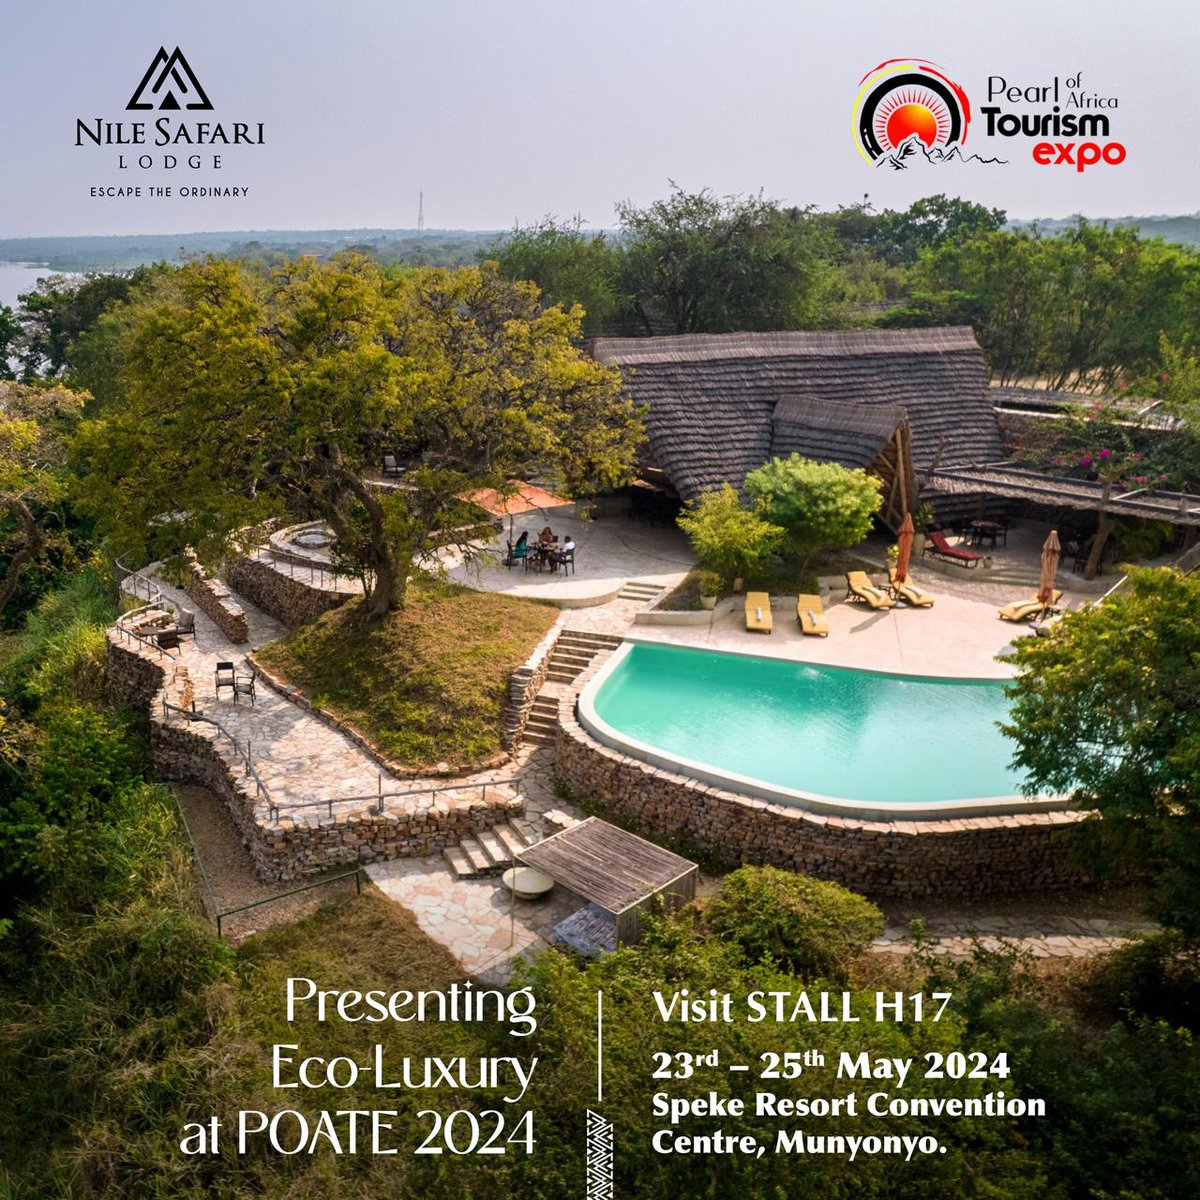 We'll be presenting eco-luxury at the Pearl of Africa Tourism Expo 2024!
Visit us at stall H17 to discover our exclusive, luxurious, and eco-friendly hospitality offerings.
See you all on 23rd - 25th May 2024 at Speke Resort, Munyonyo! 
#nilesafarilodge #exploreuganda #POATE2024